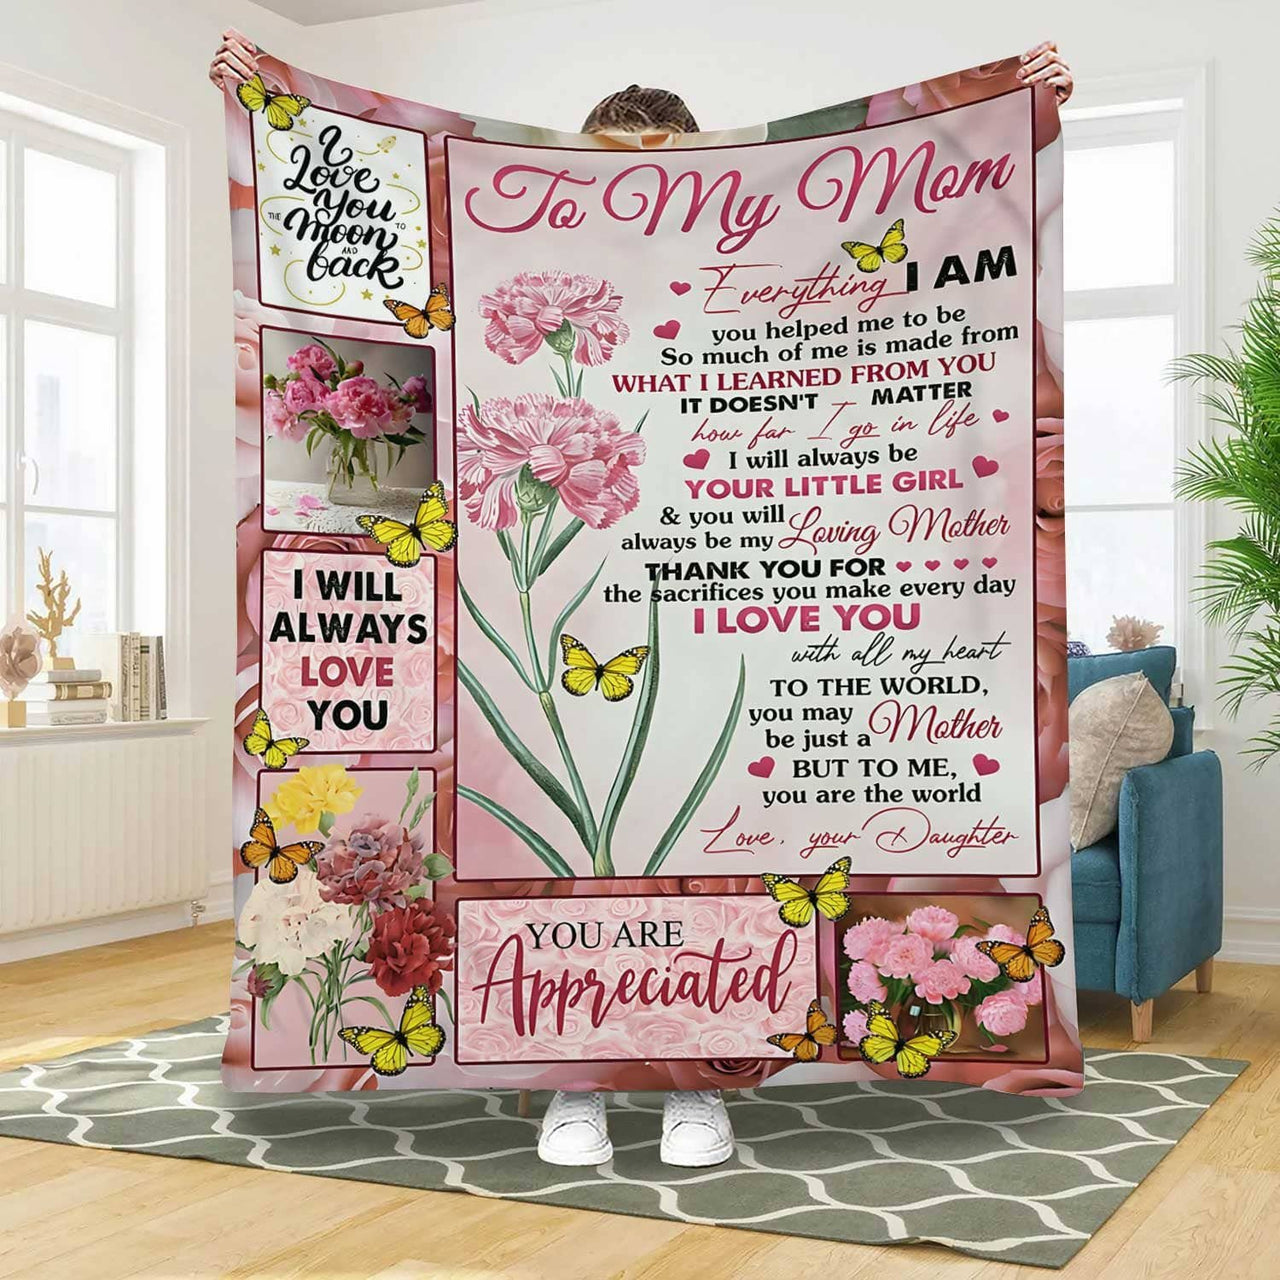 Personalized Carnation Flowers Blanket for Mom, Mom and Daughter Carnation Tree Art - You are the world Blanket